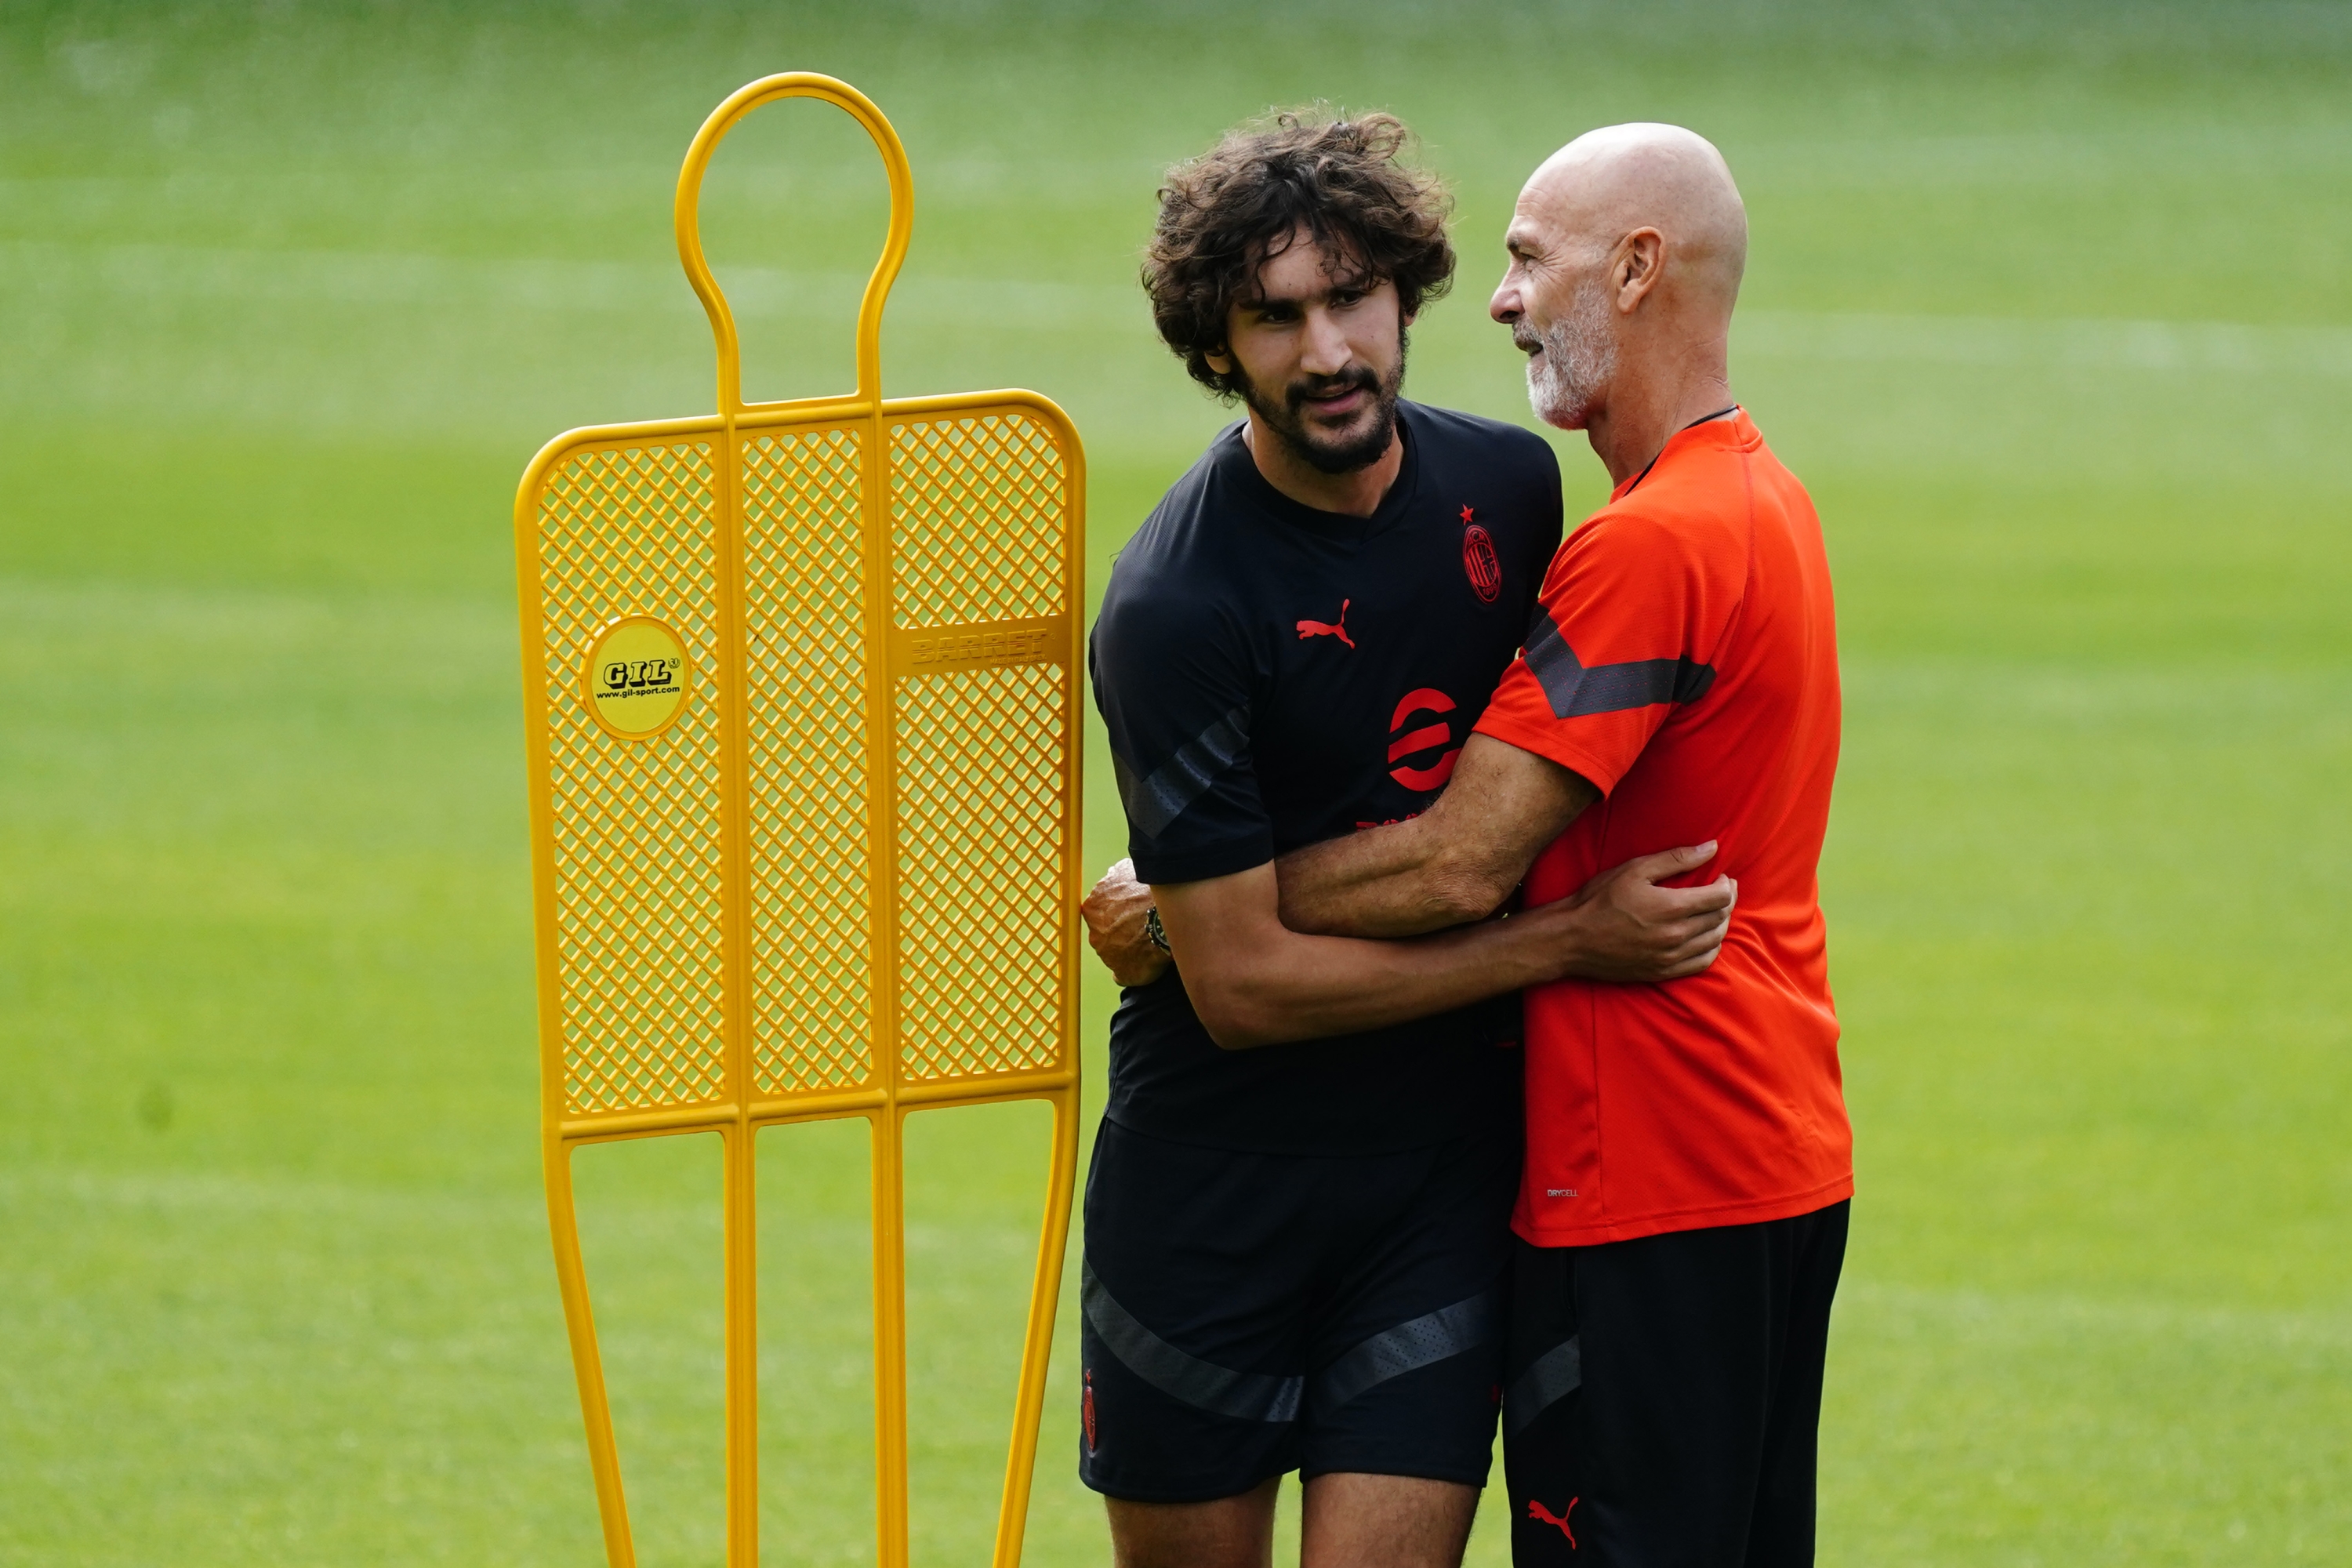 CAIRATE, ITALY - AUGUST 31: Head Coach Stefano Pioli embraces Yacine Adli during an AC Milan at Milanello on August 31, 2022 in Cairate, Italy. (Photo by Pier Marco Tacca/AC Milan via Getty Images)